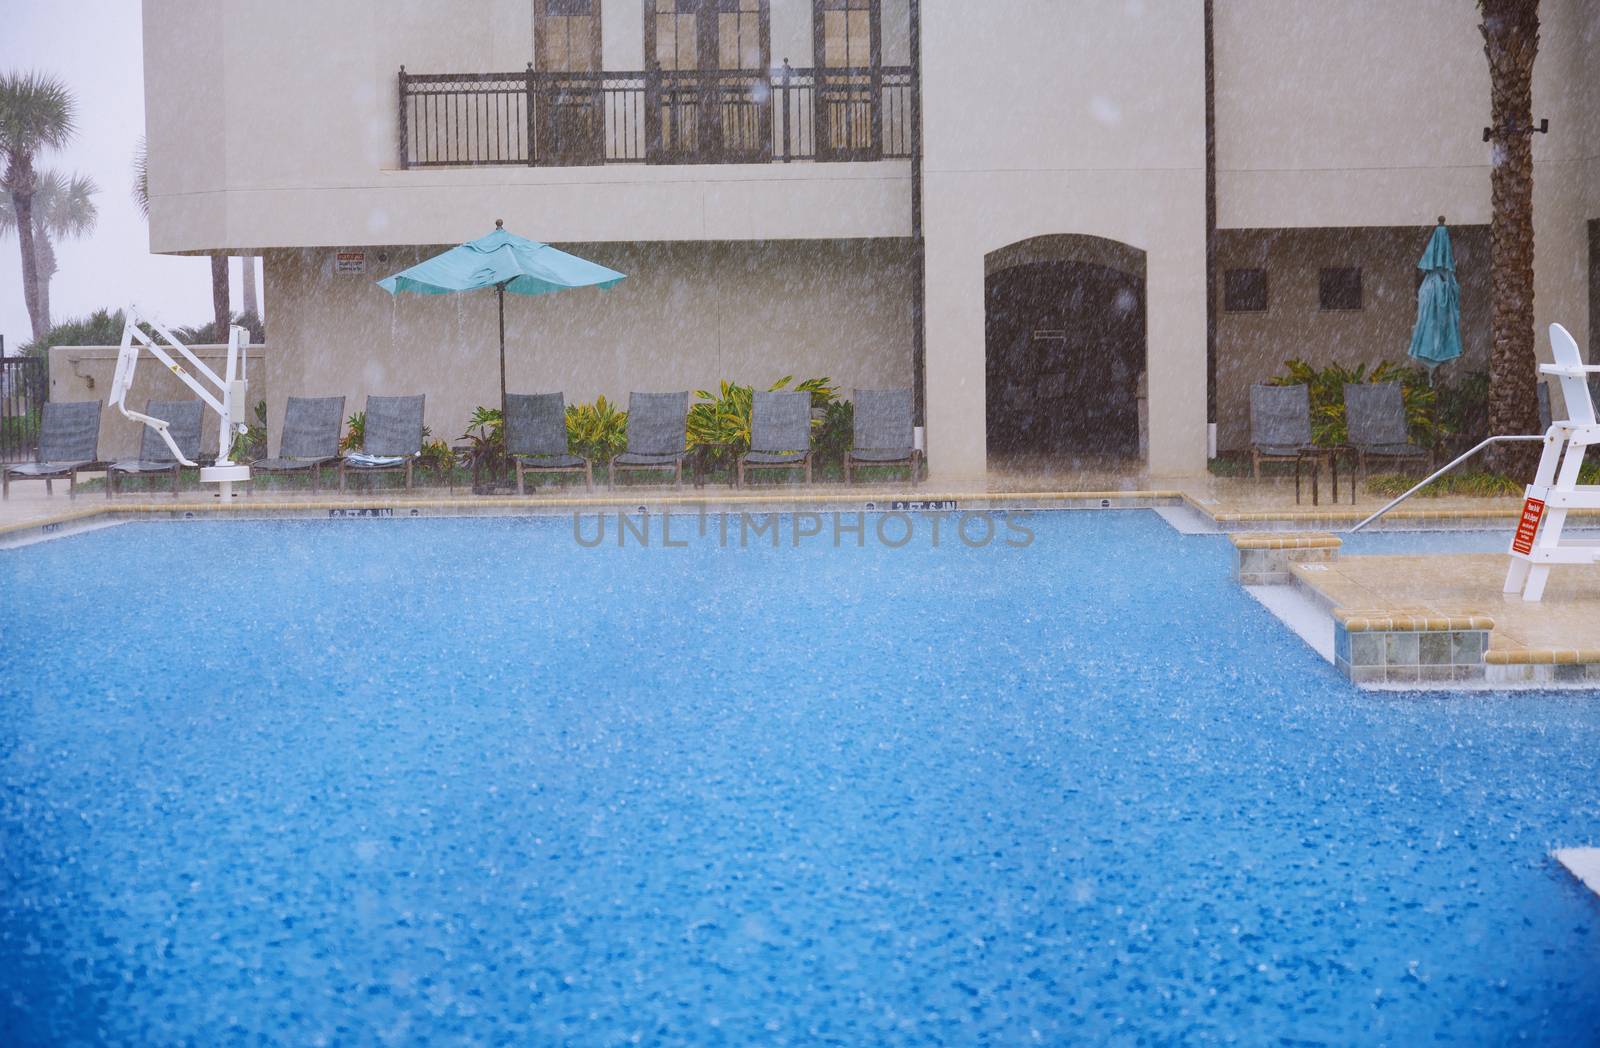 Outdoors swimming pool under the heavy rain by Novic